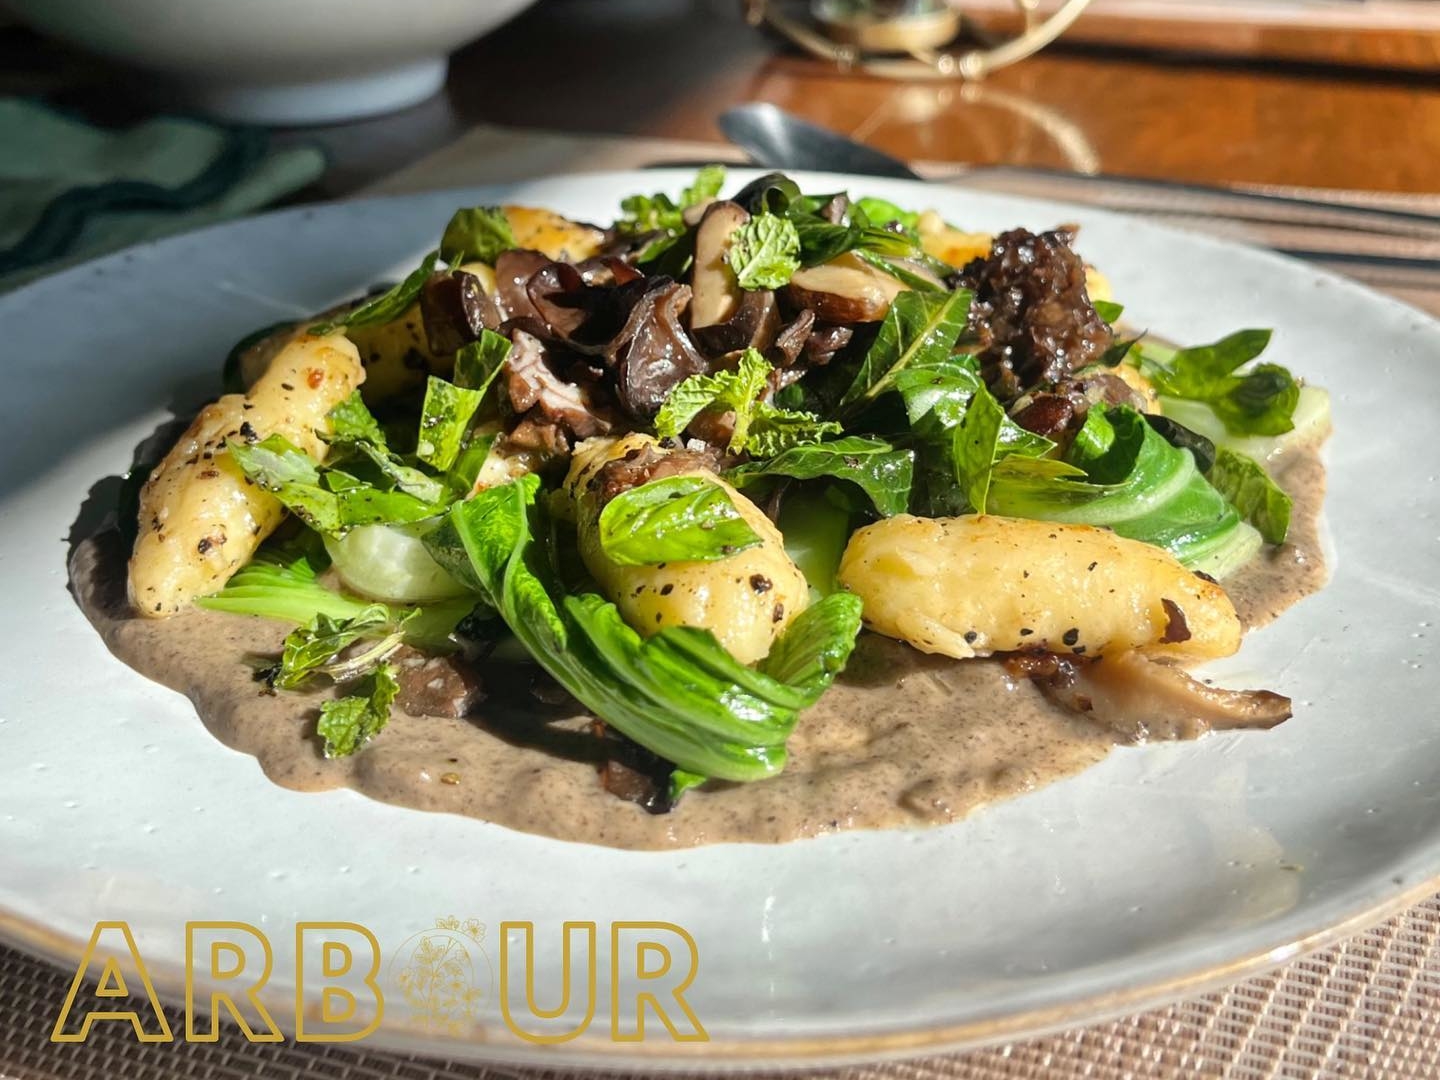 Food from Arbour by Jan in Dumaguete, Philippines 